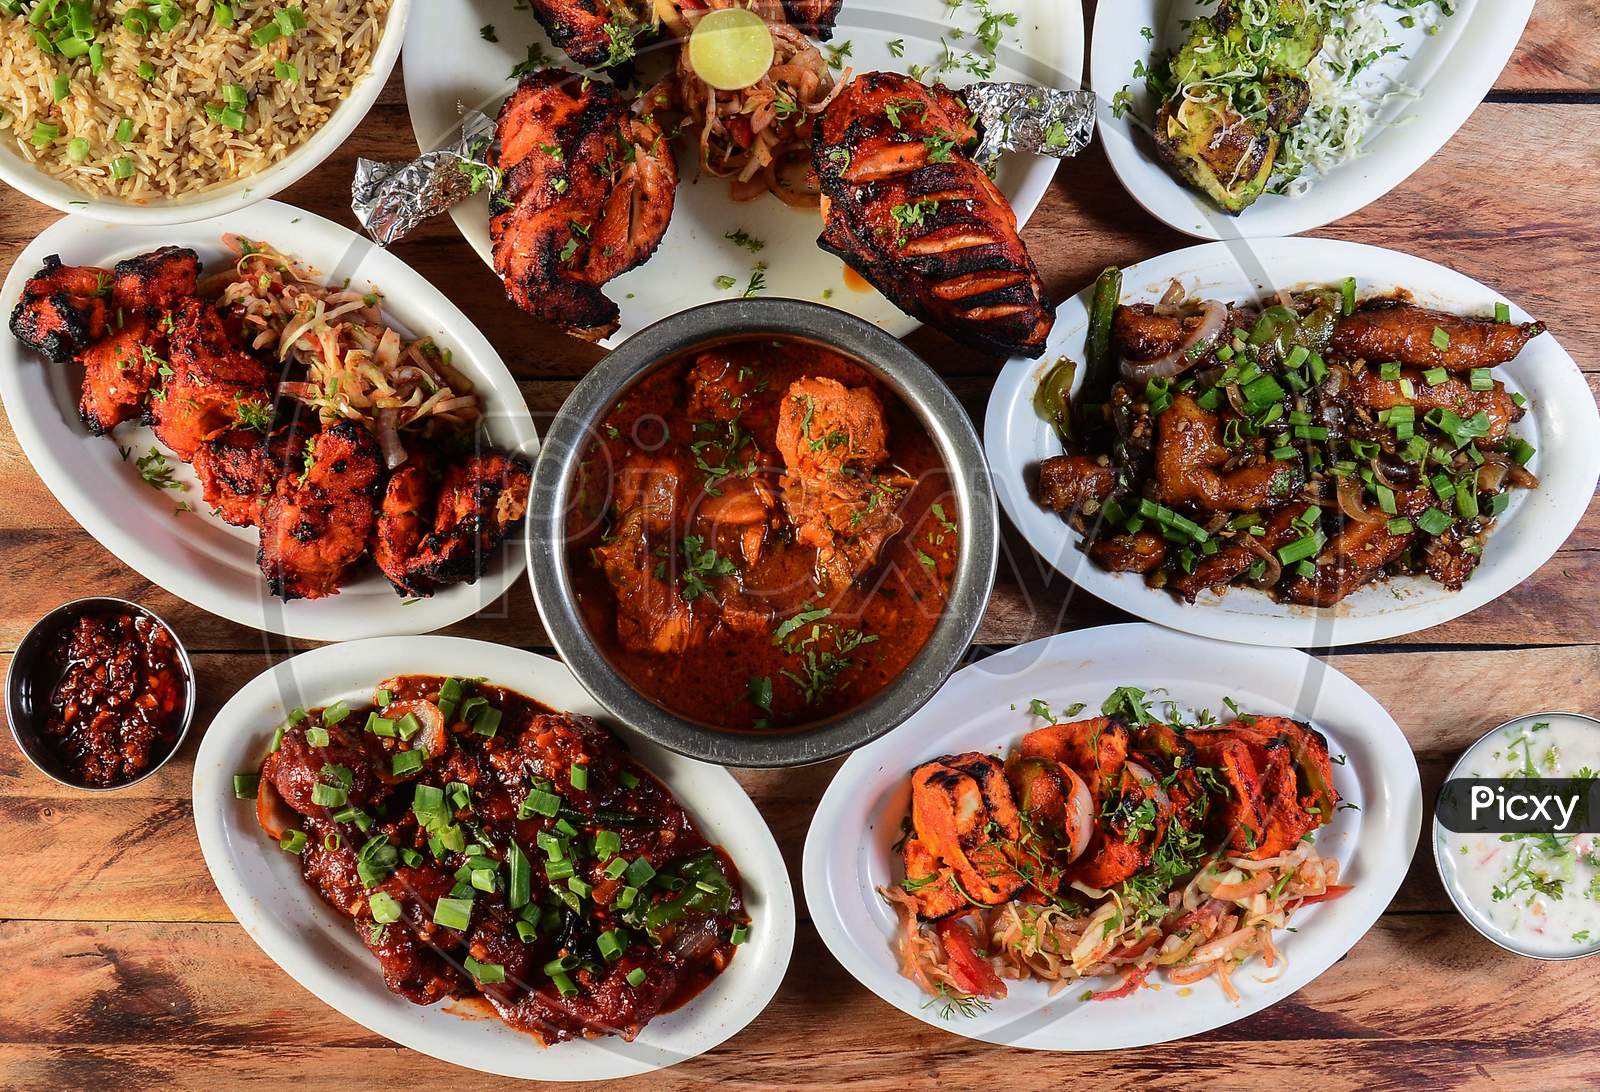 Assorted Indian Foods Chicken Pahadi Kebab,Chicken Angara Kebab,Tandoori Chicken,Pepper Chicken, Paneer Tikka And Chicken Masala On Wooden Background. Dishes And Appetizers Of Indian Cuisine